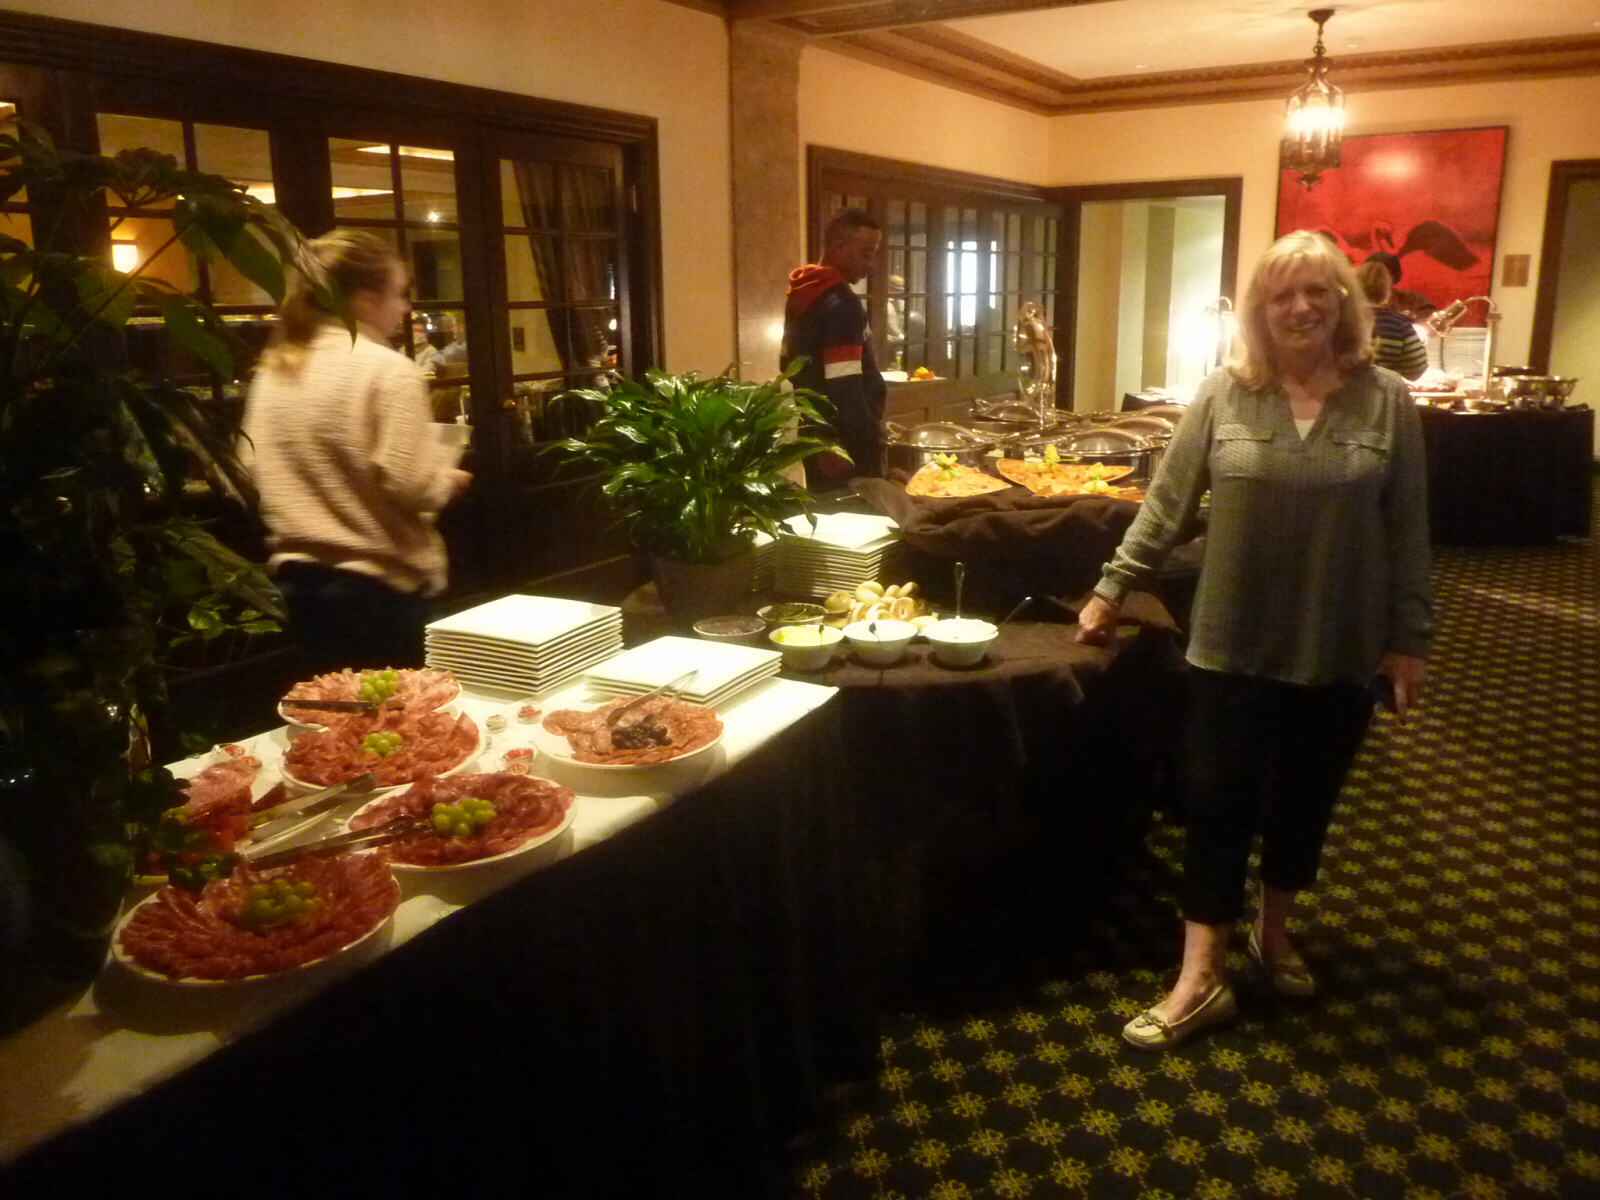 The Sunday lunch buffet at the Peabody hotel, Memphis